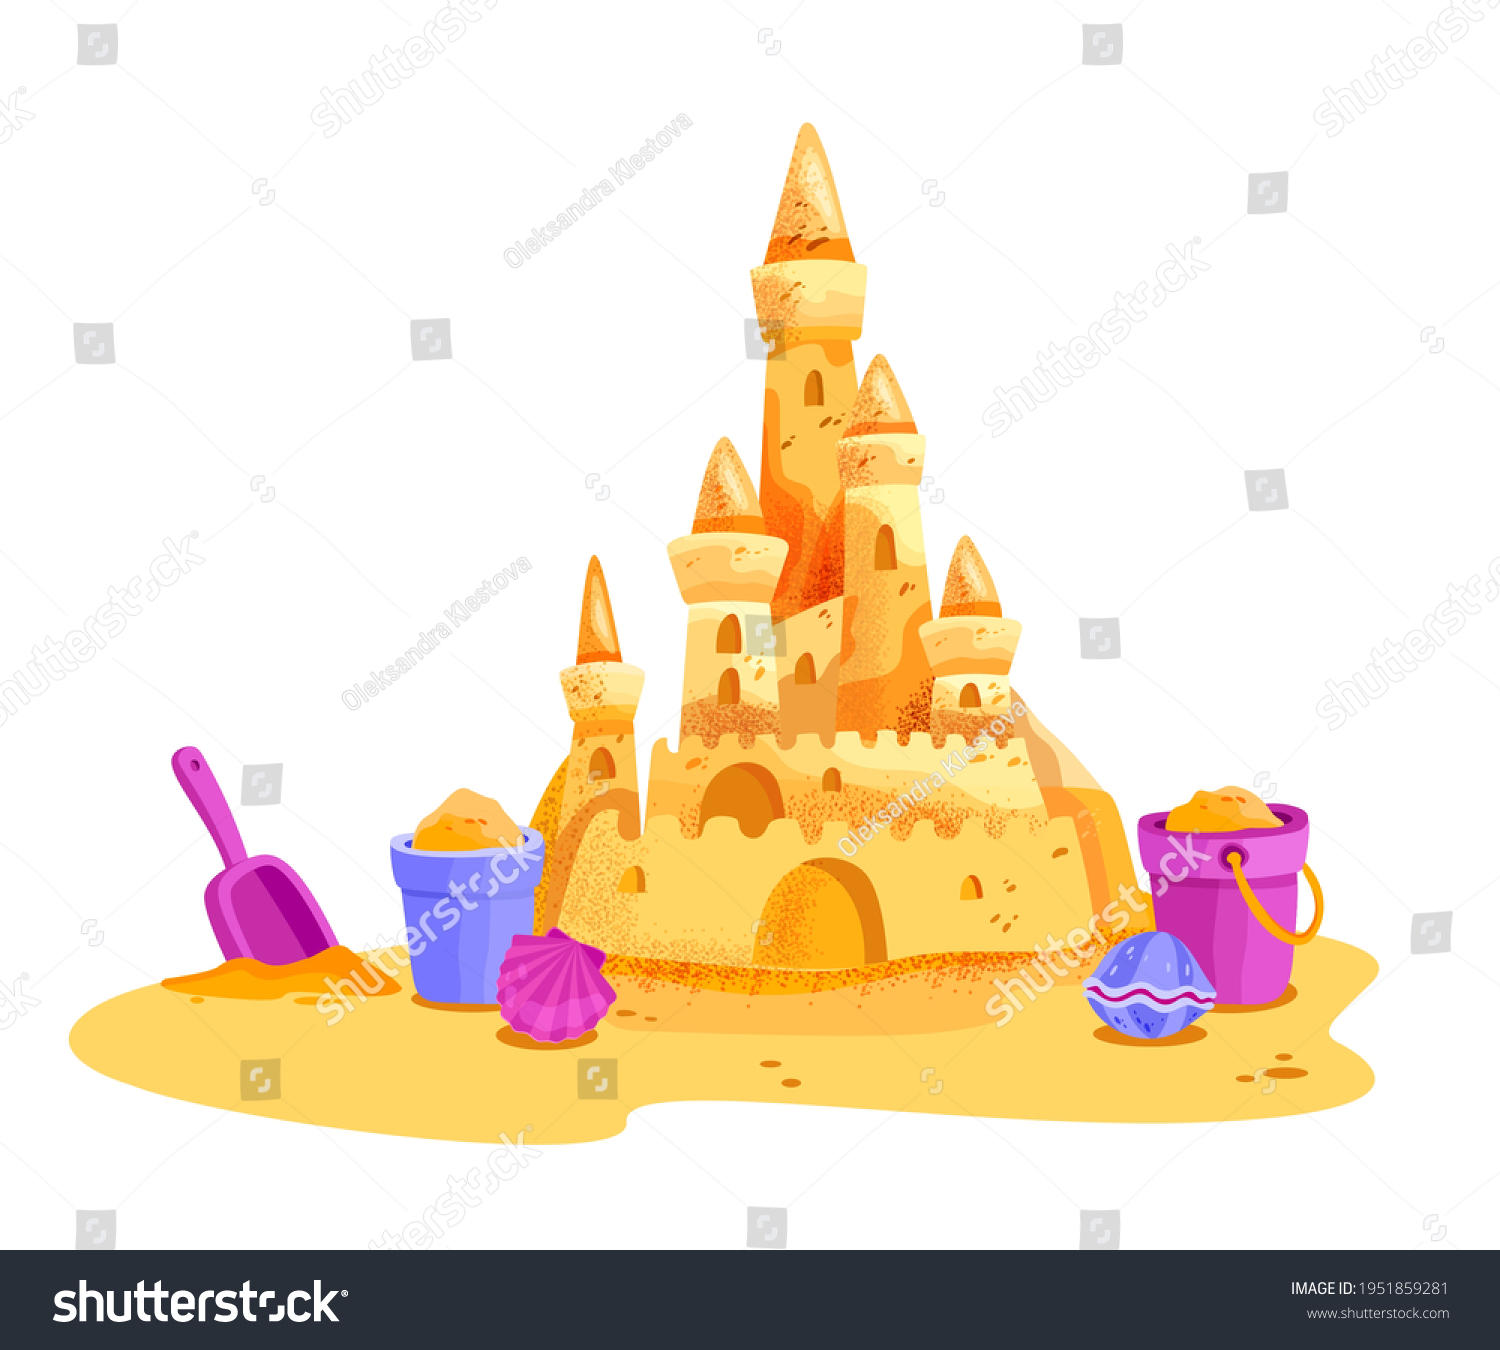 SVG of Sand castle vector summer beach illustration, cartoon vacation kids clipart, yellow towers, bucket, shovel. Childhood seashore game concept isolated on white. Sand castle, fairy fortress sculpture svg